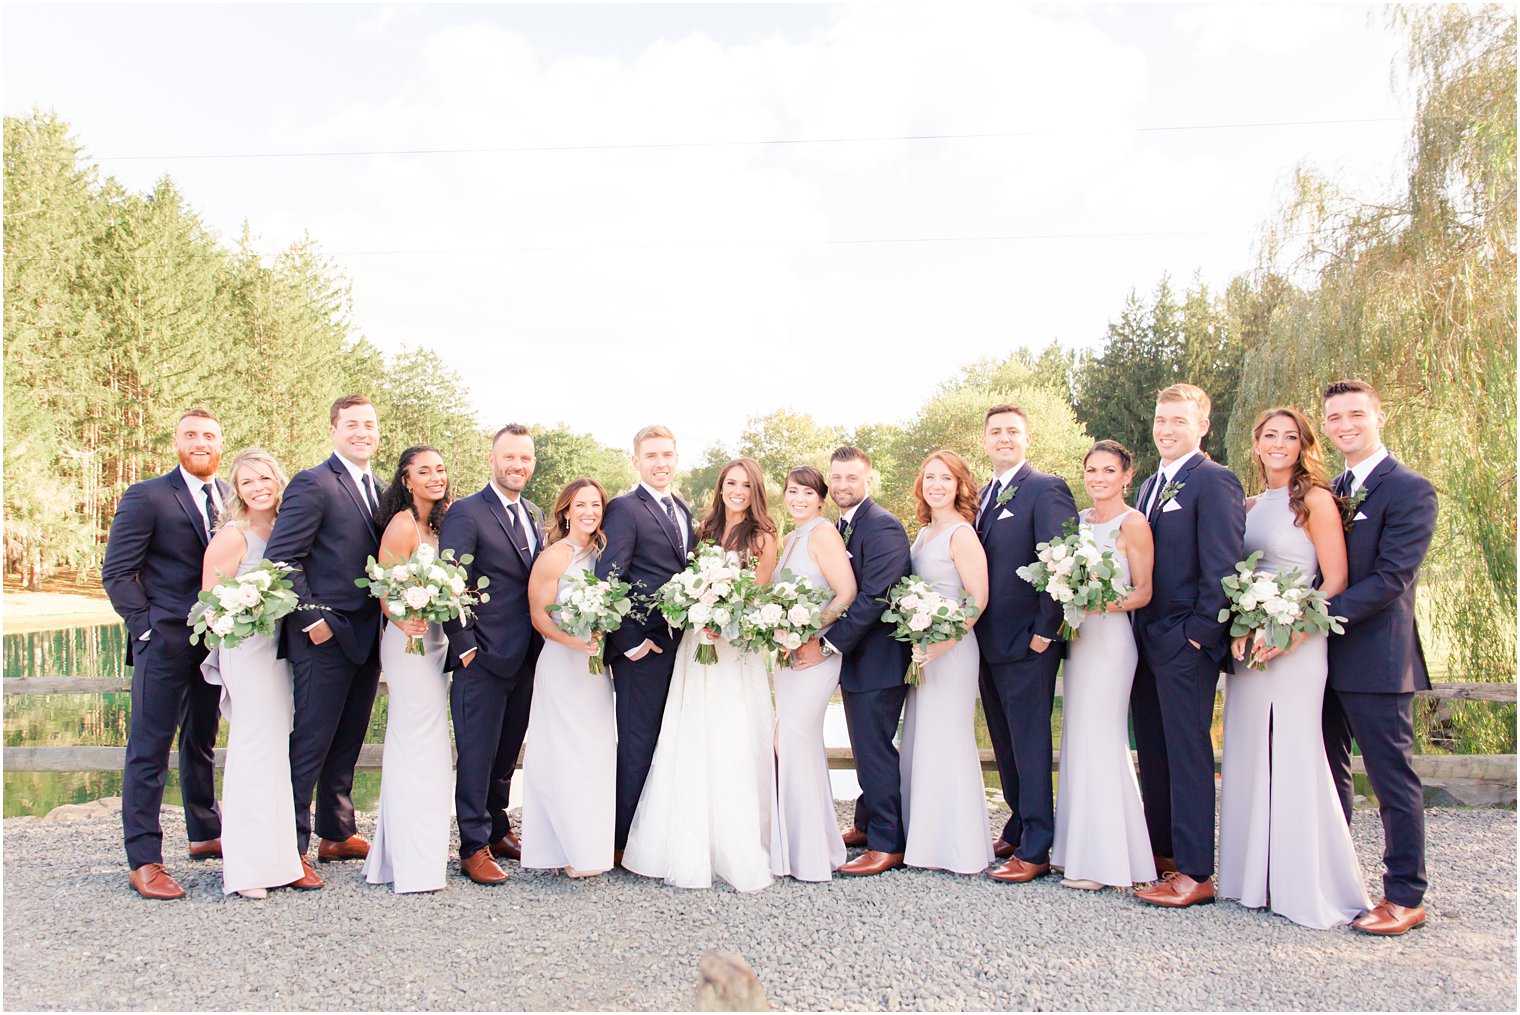 wedding party portraits by Idalia Photography at Windows on the Water at Frogbridge